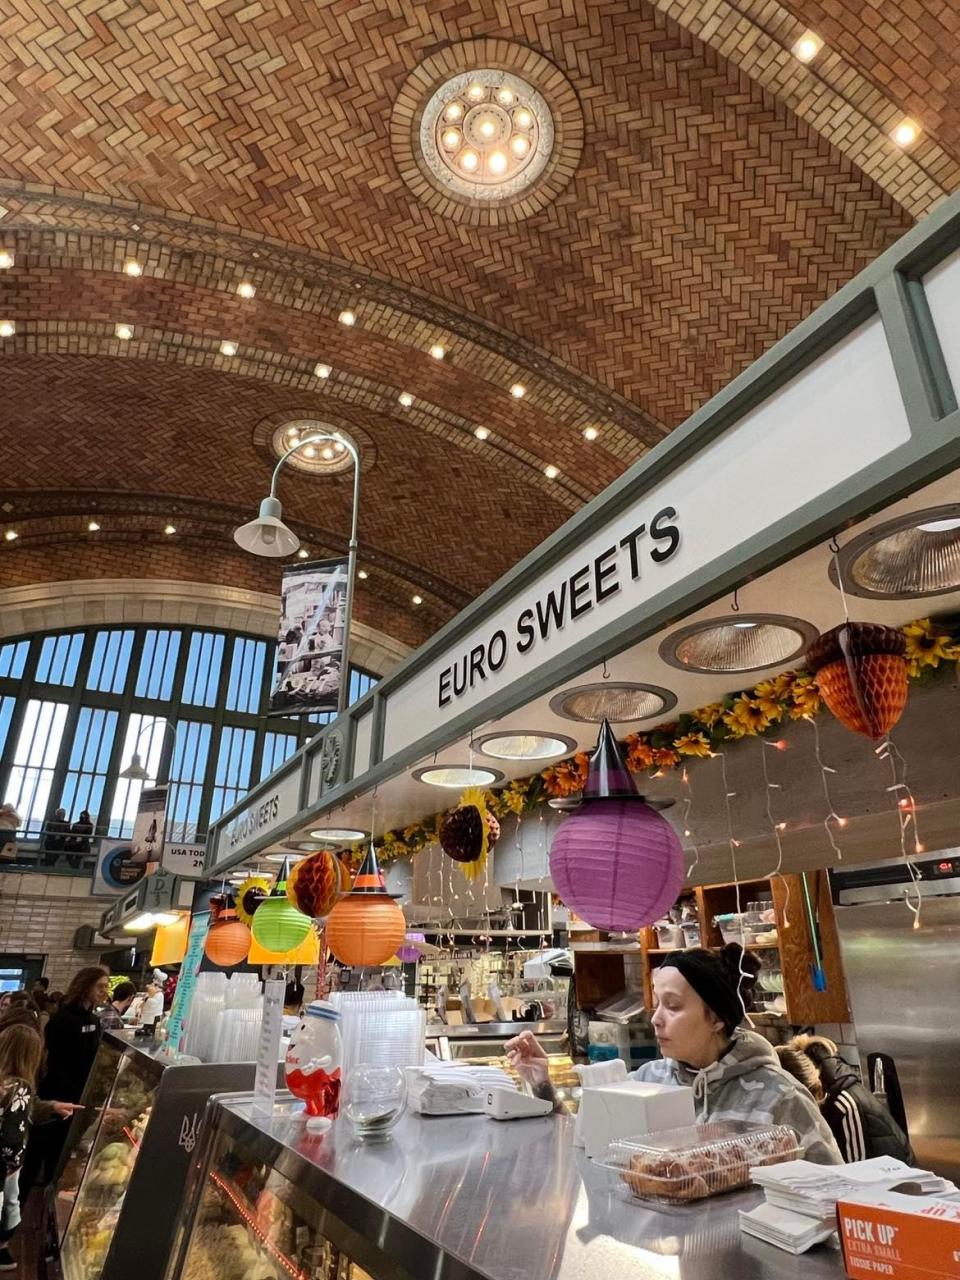 The West Side Market in the historic Ohio City in Cleveland is a wonderland of baked goods, ethnic specialties, meats, pasta, cheeses, fresh produce, seafood and other items.